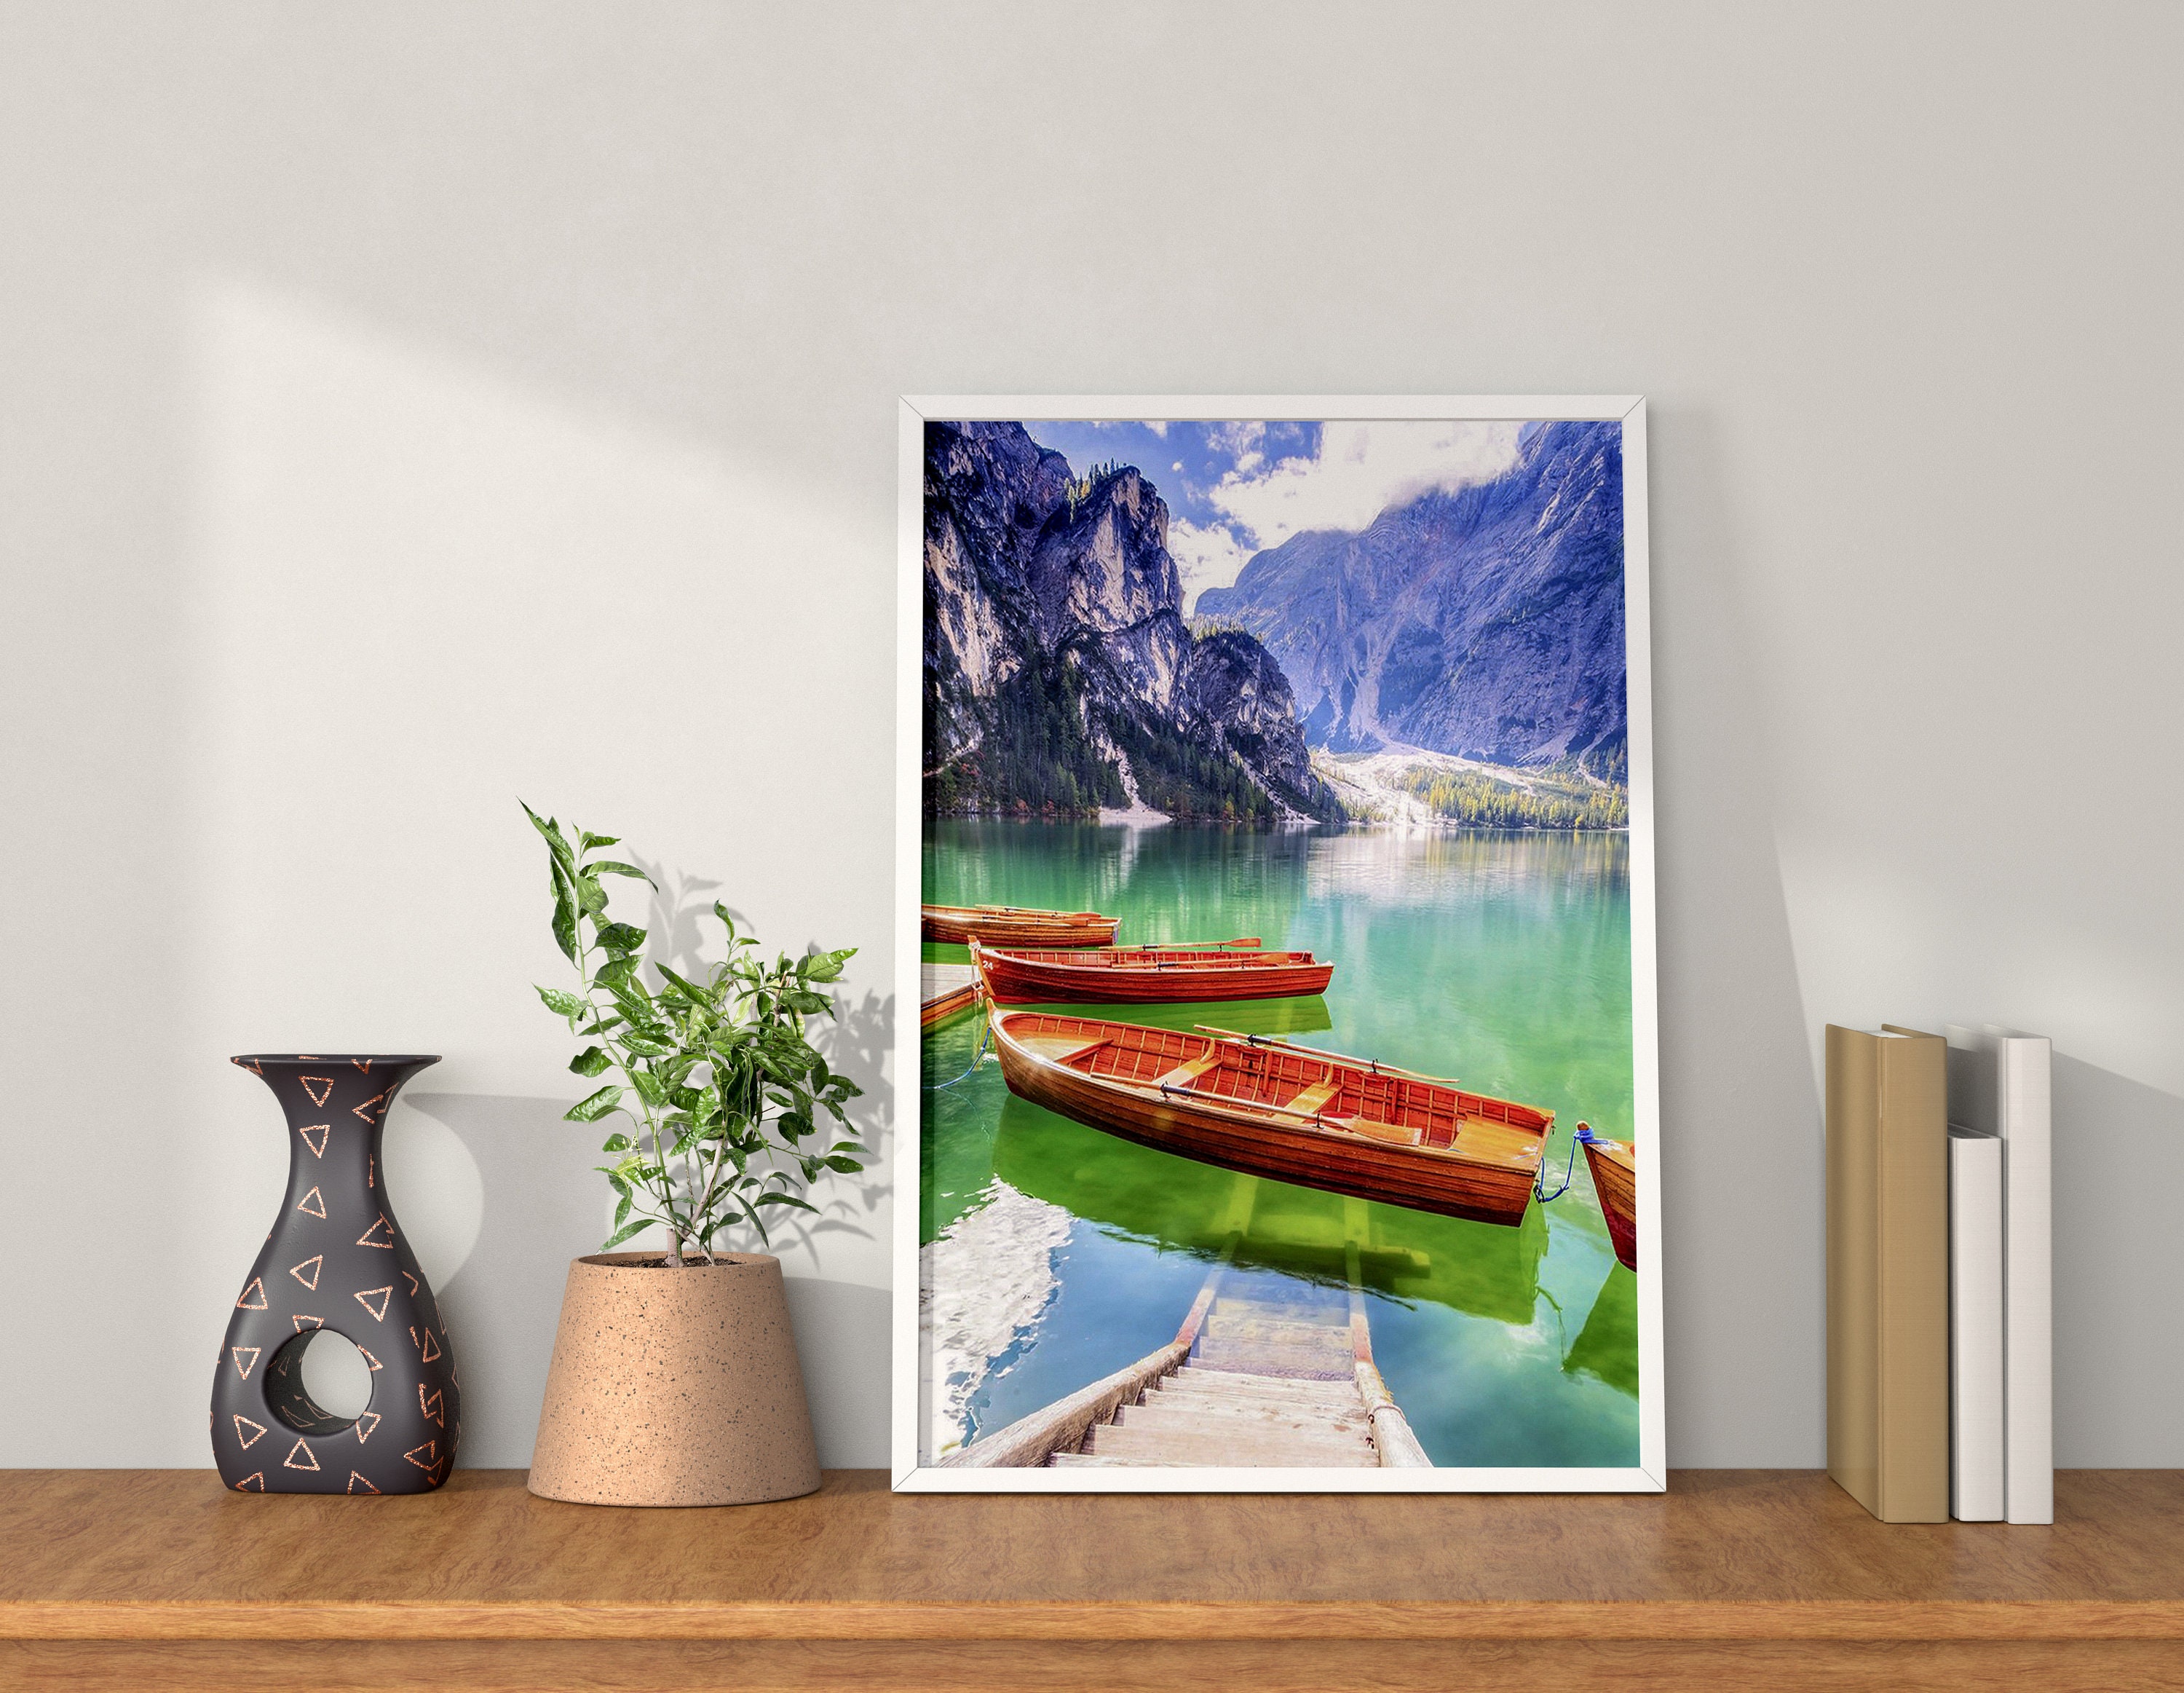 Green Lake In The Mountains Lago Di Braies Italy Modern Design Decor Canvas Print Wall Art Picture